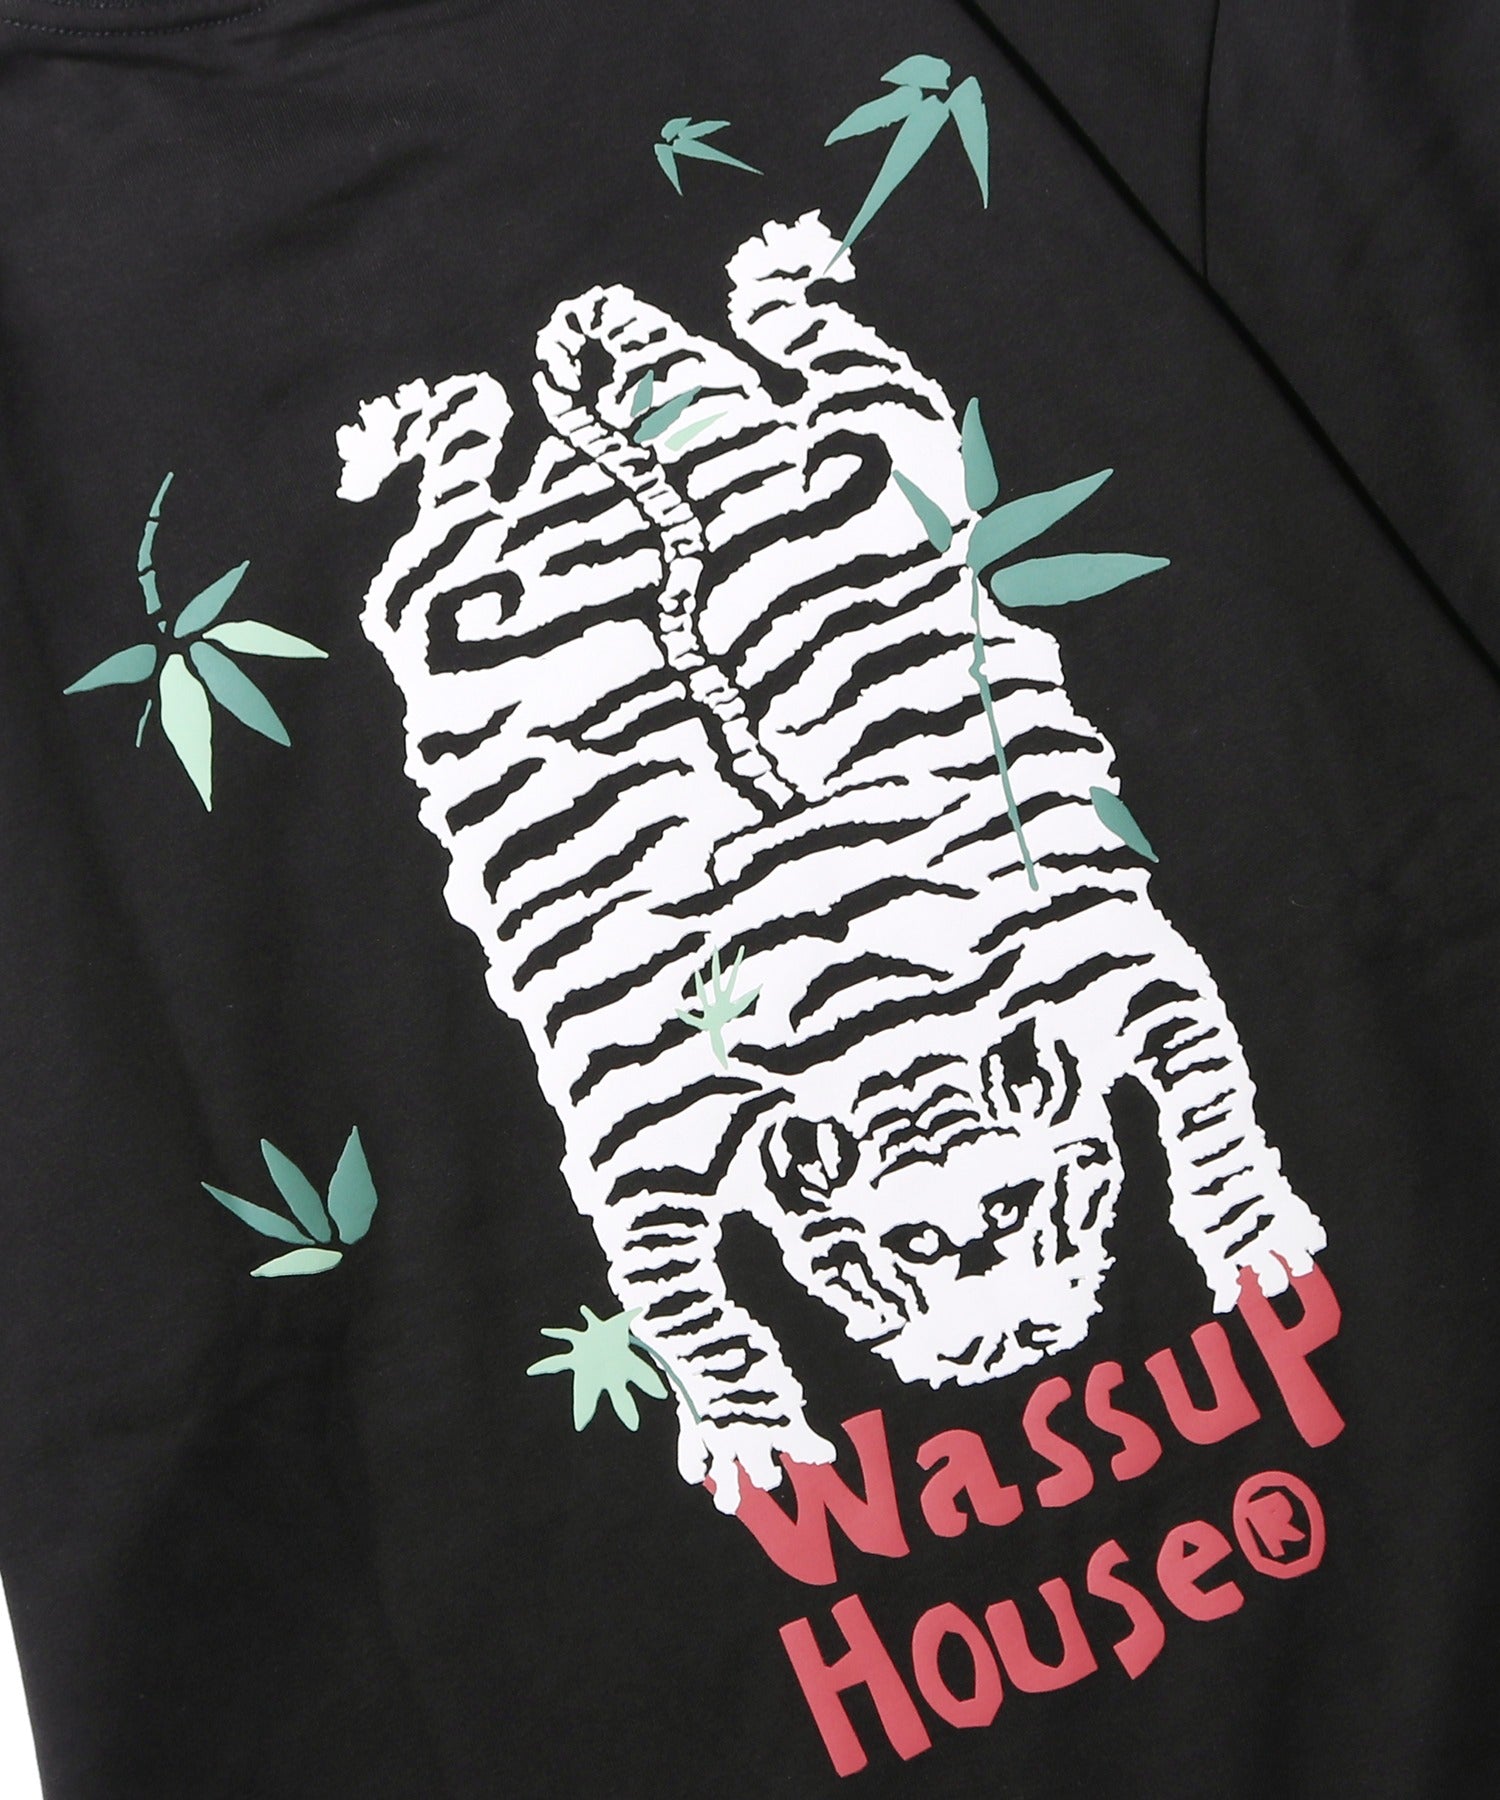 Wassup House Tiger Tee